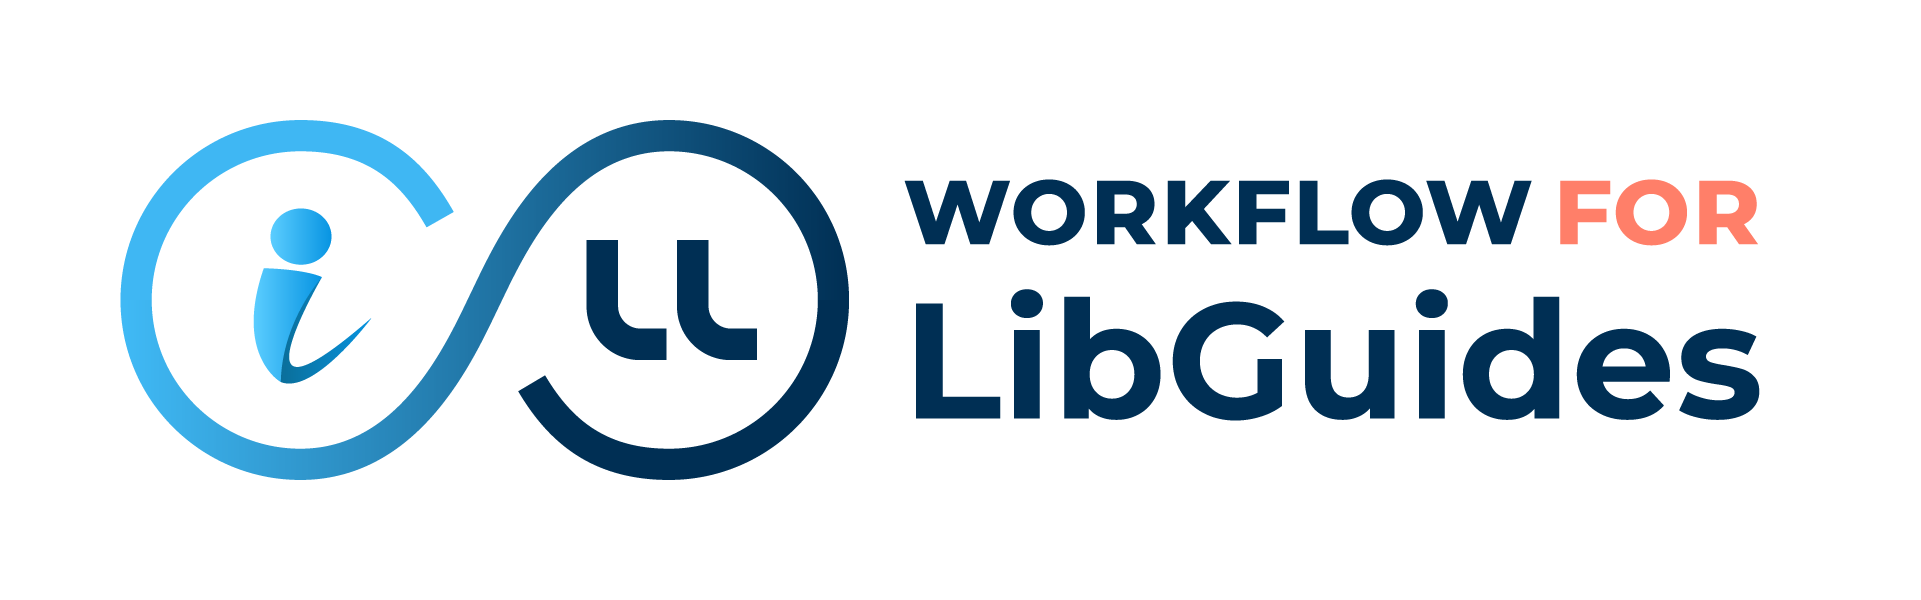 Lean Library Workflow